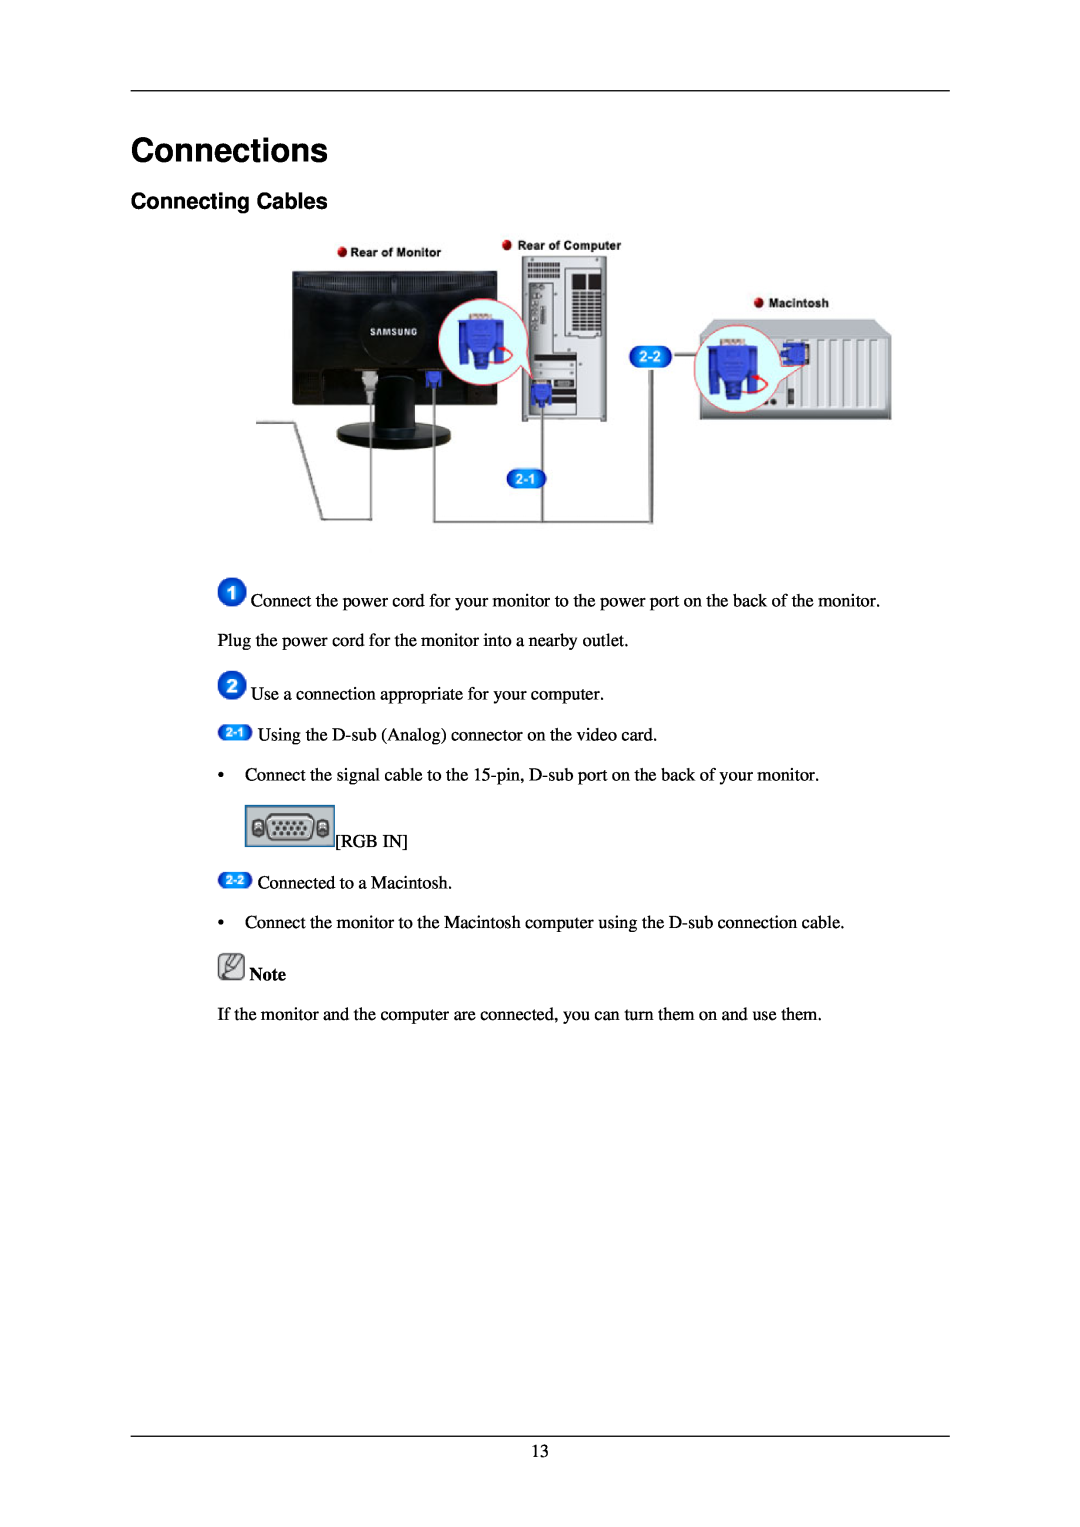 Samsung 2243NWX user manual Connections, Connecting Cables 